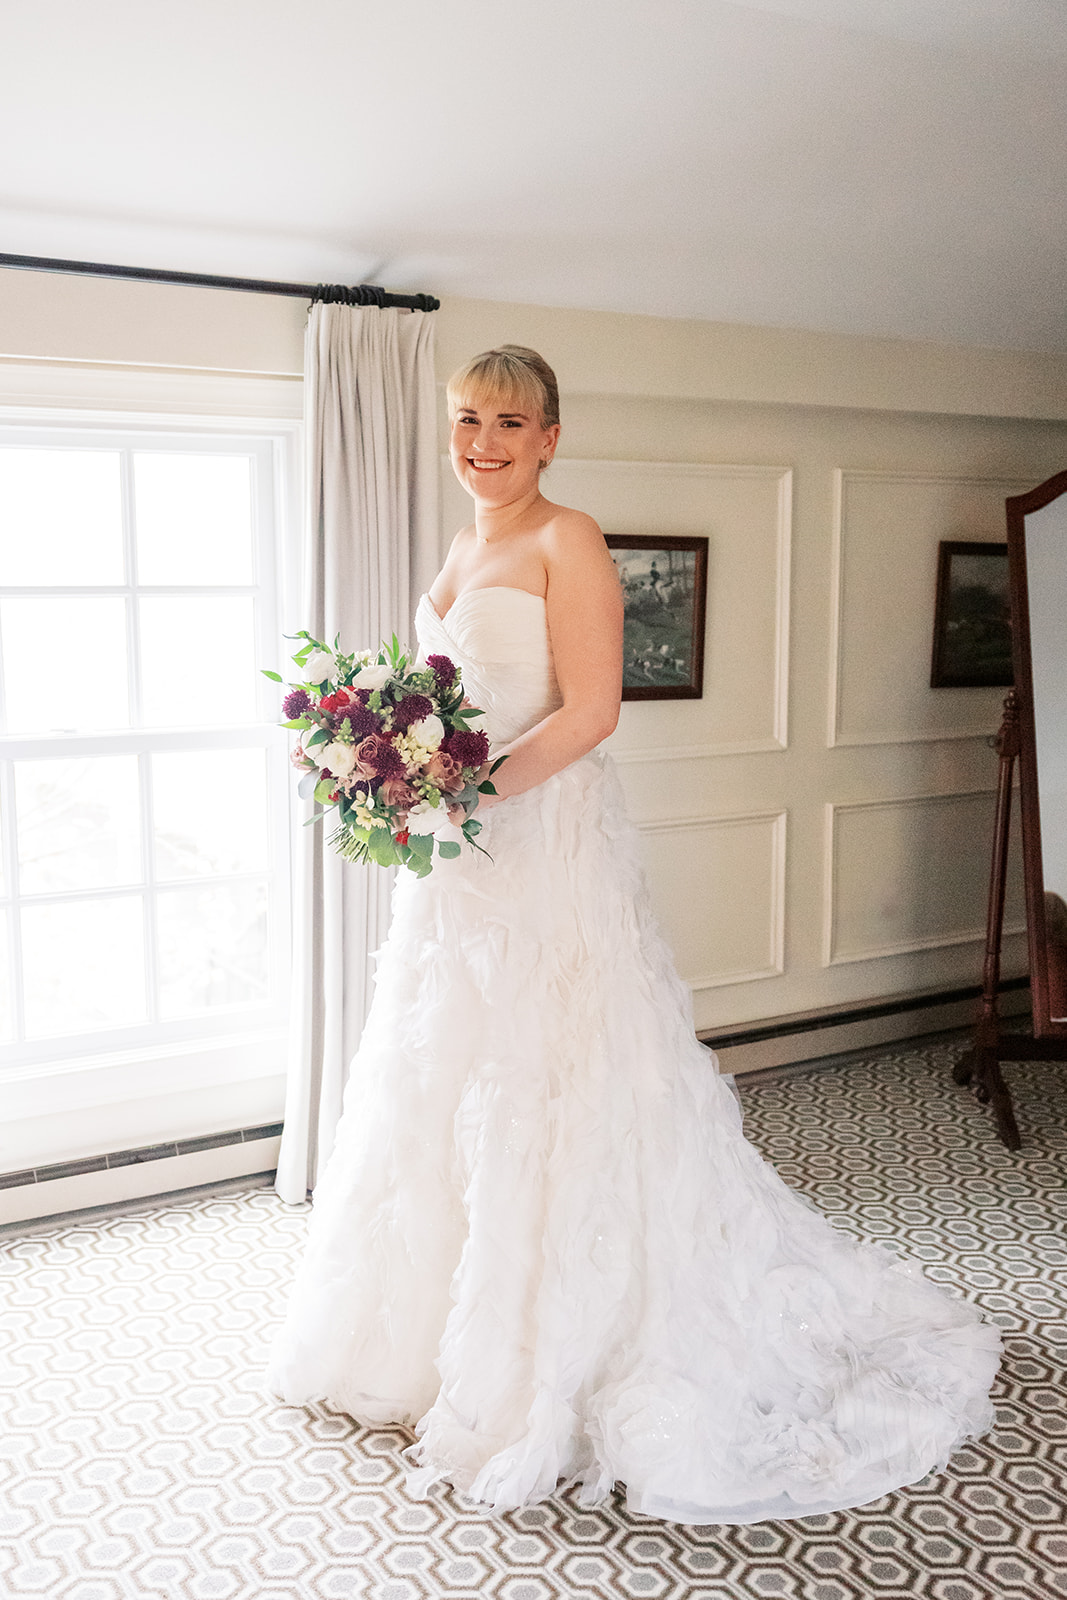 A bride stands in a window smiling and holding her bouquet